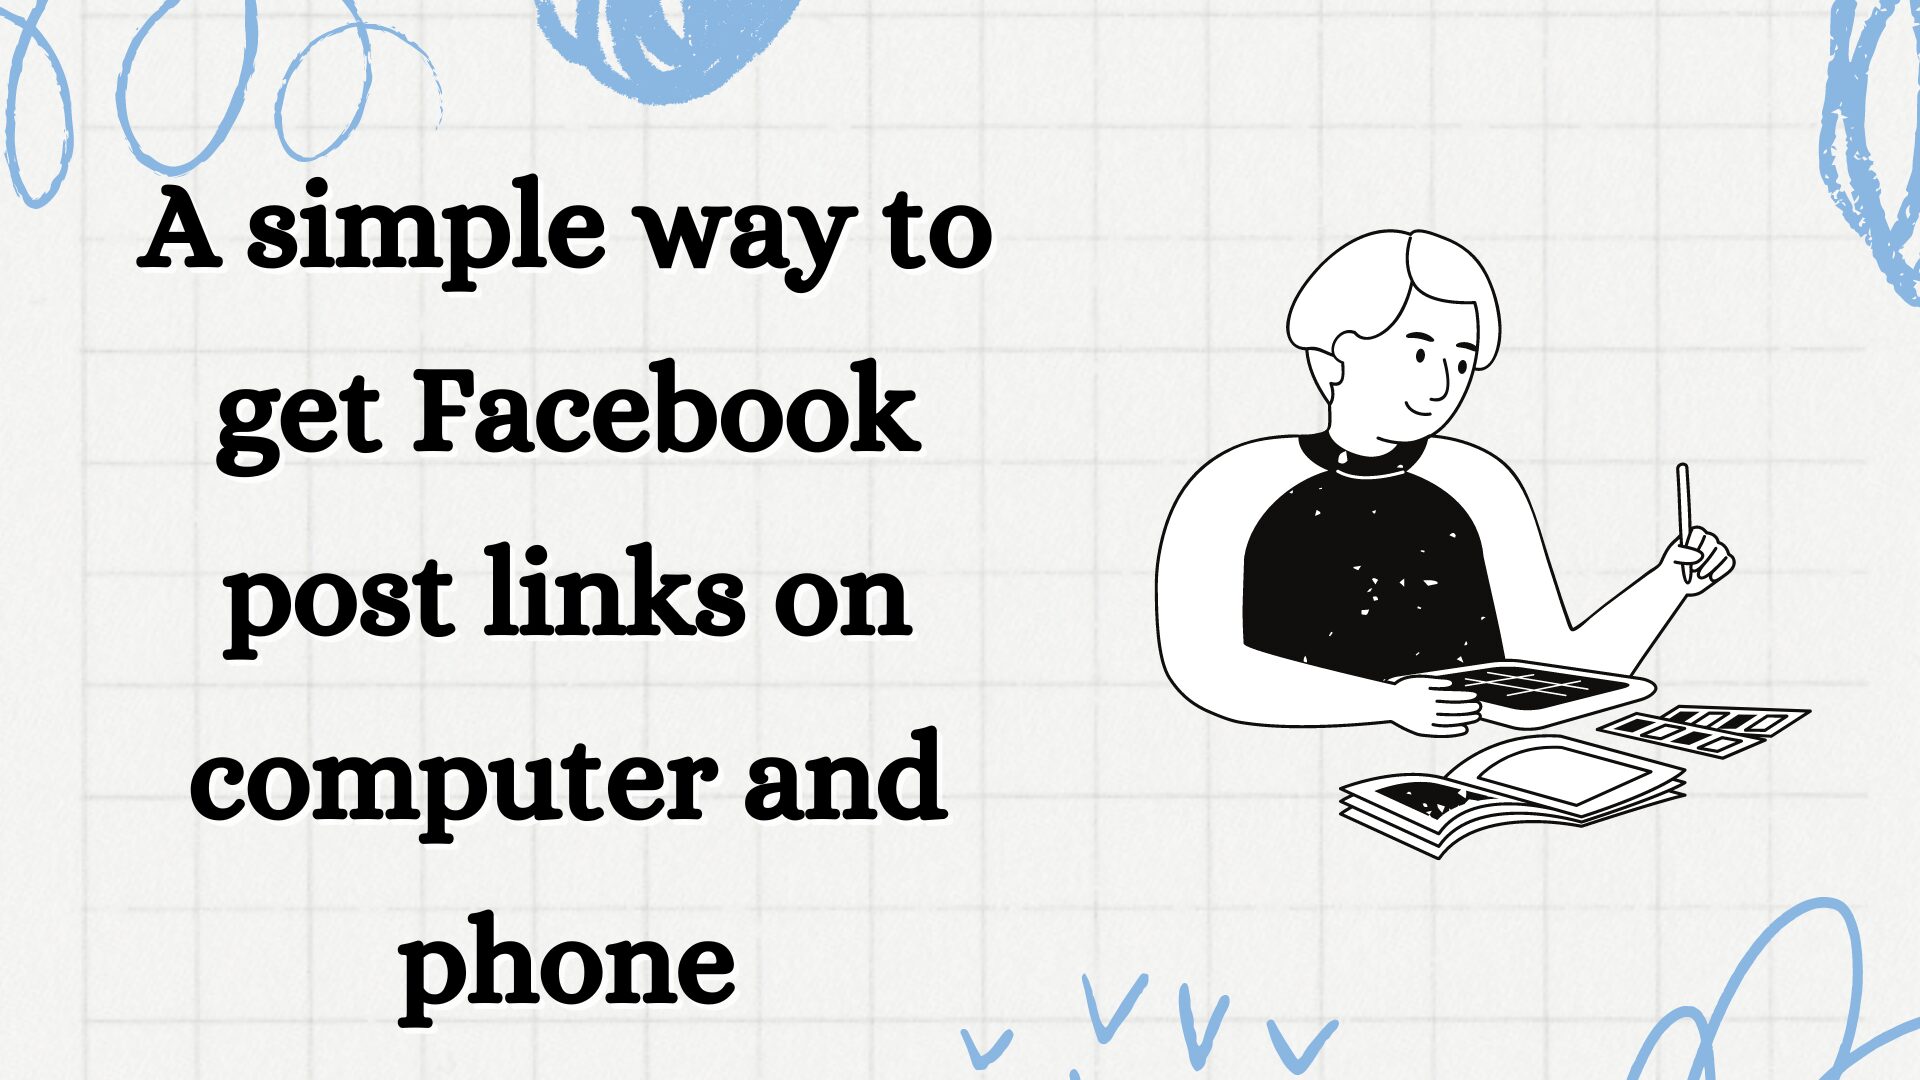 The simplest way to get Facebook post links on phones and computers